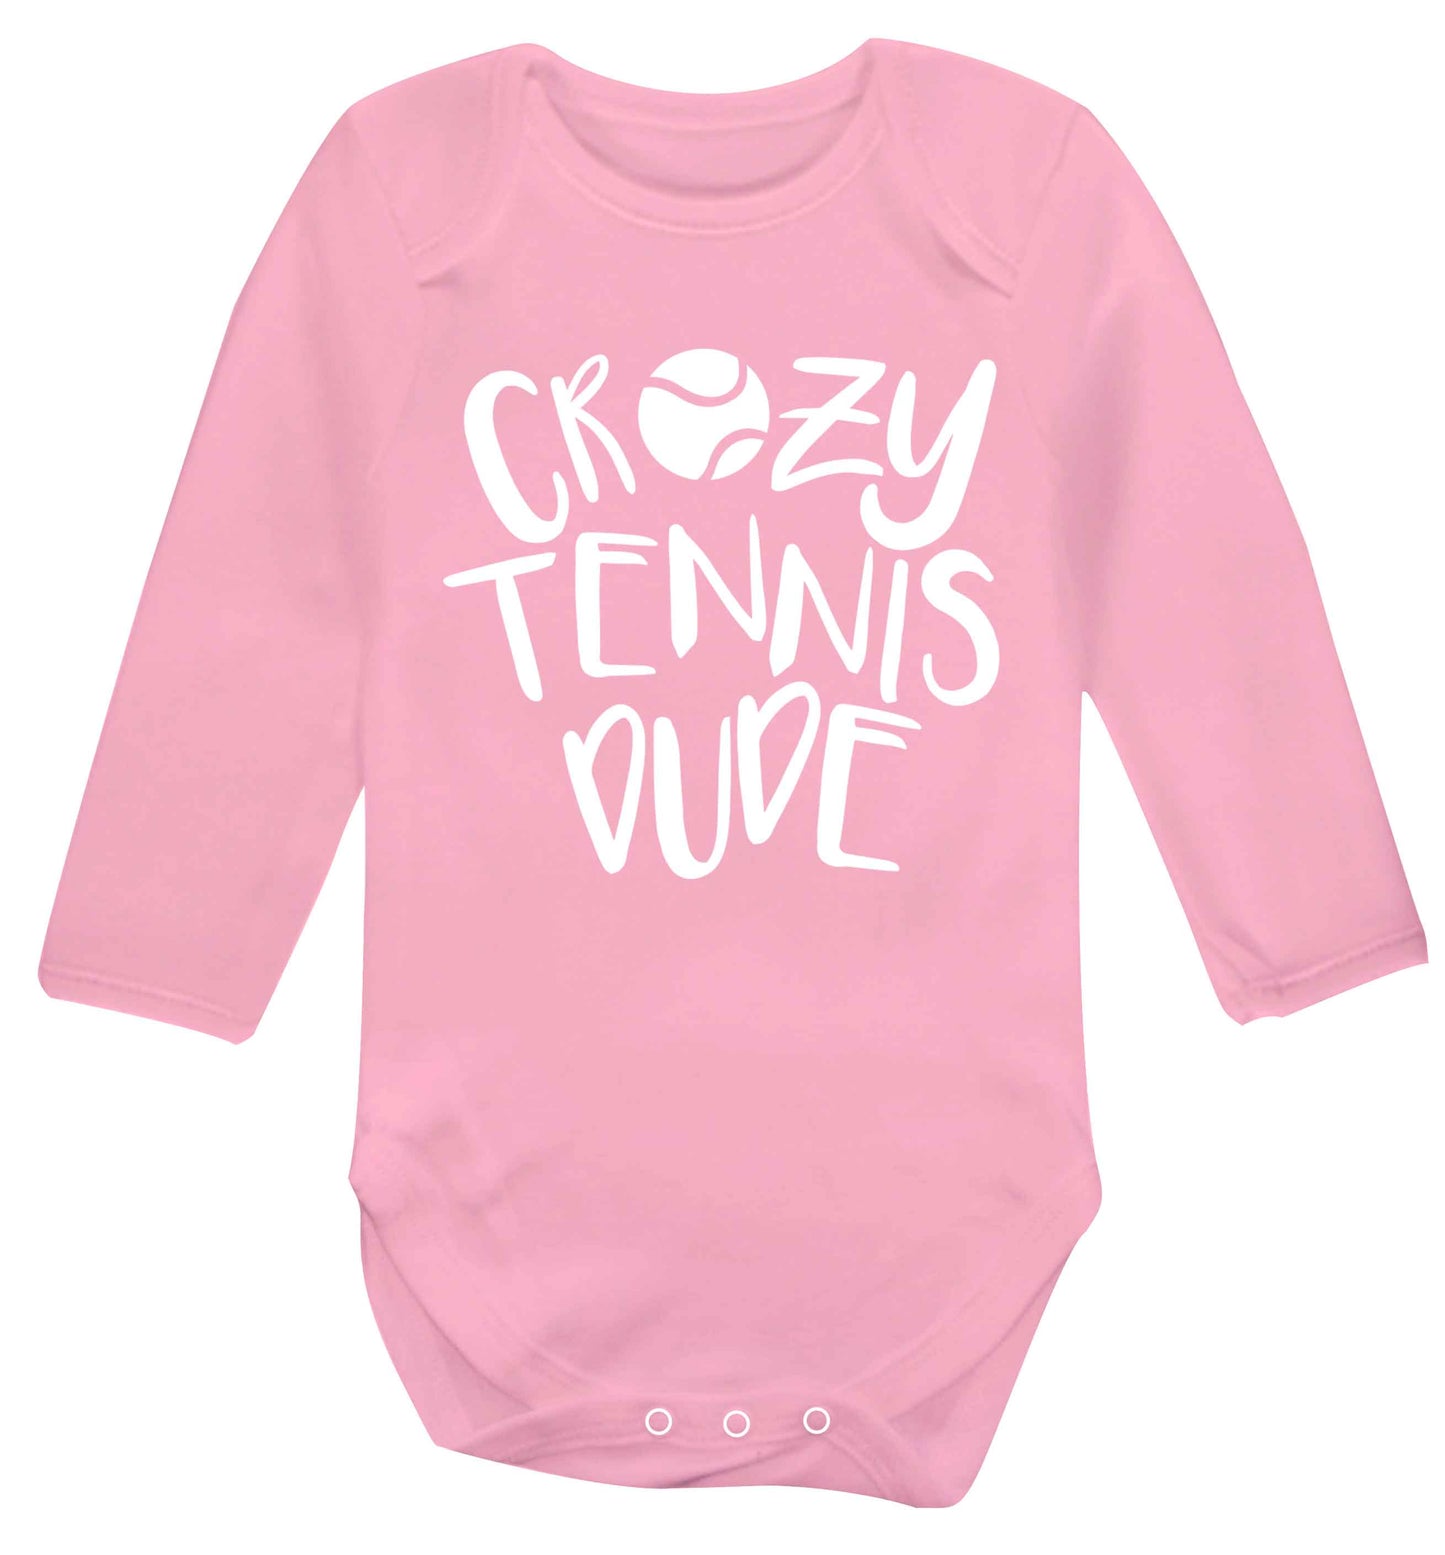 Crazy tennis dude Baby Vest long sleeved pale pink 6-12 months